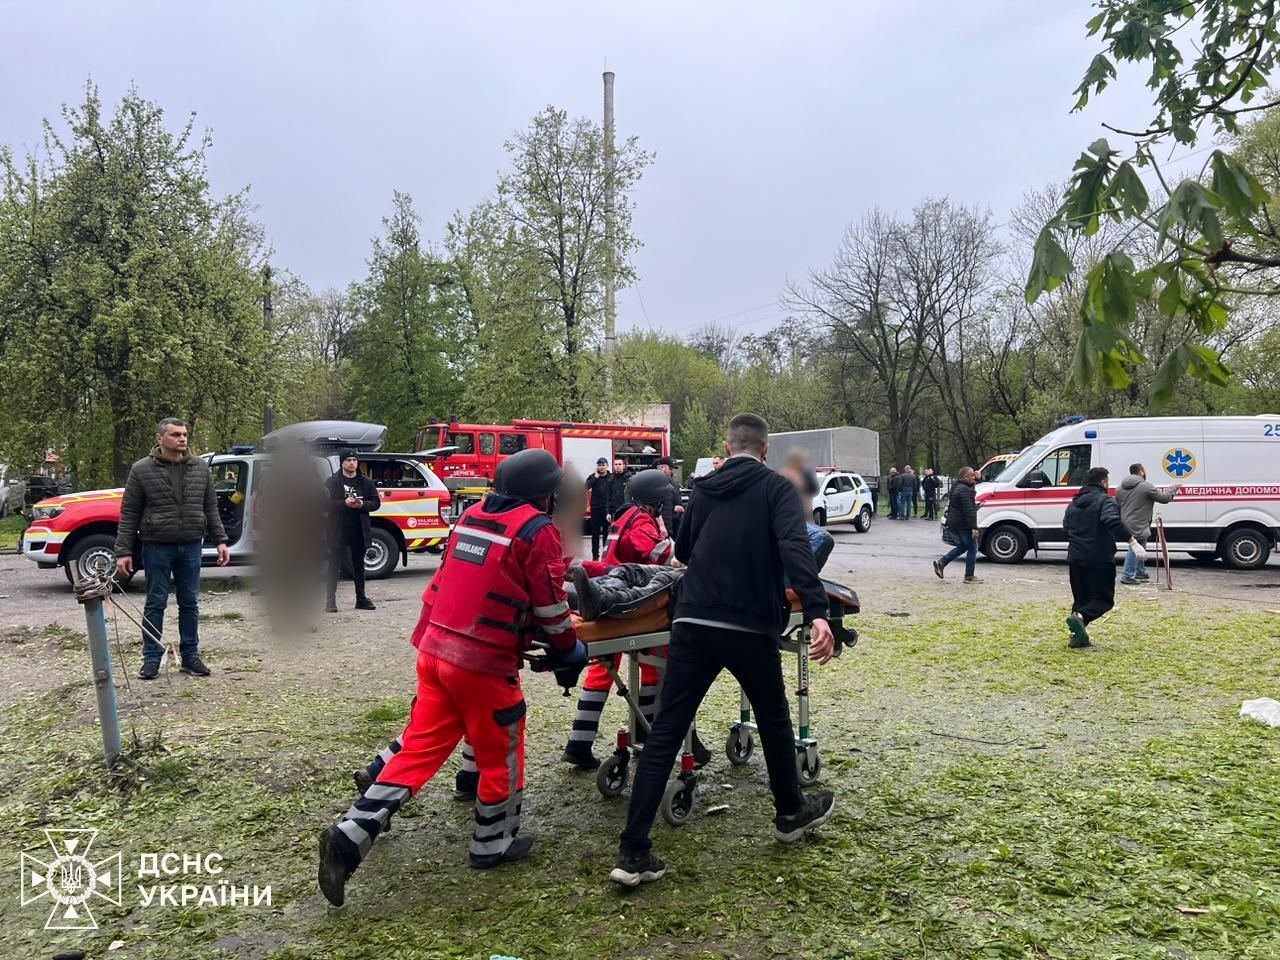 Occupants struck three times in Chernihiv: the death toll has risen to 13, dozens wounded. Photos and videos